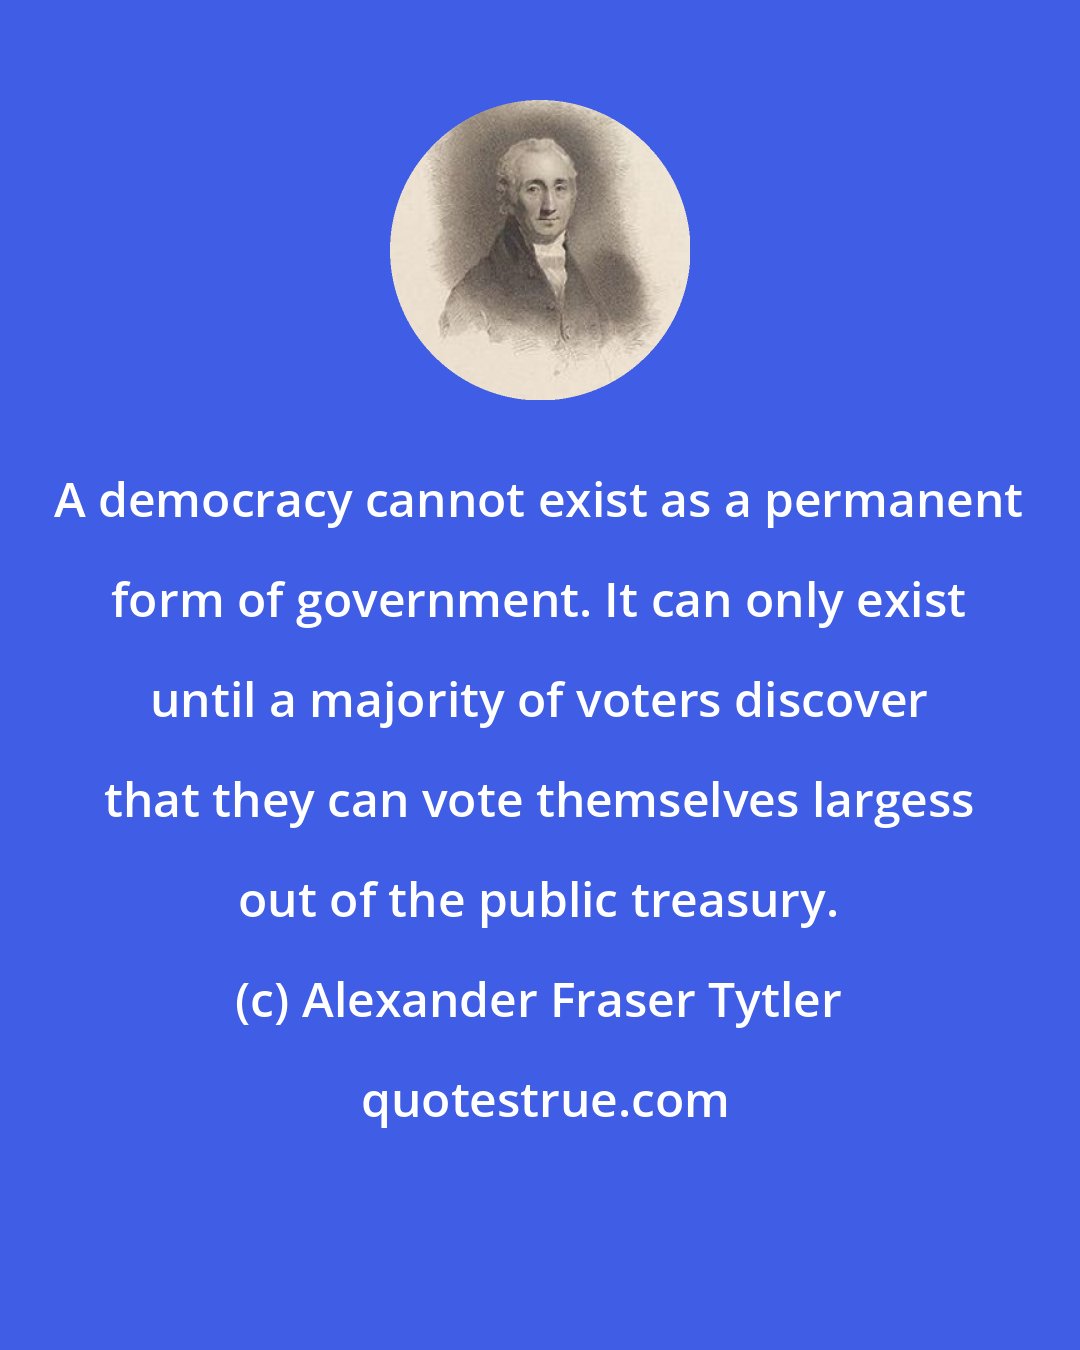 Alexander Fraser Tytler: A democracy cannot exist as a permanent form of government. It can only exist until a majority of voters discover that they can vote themselves largess out of the public treasury.